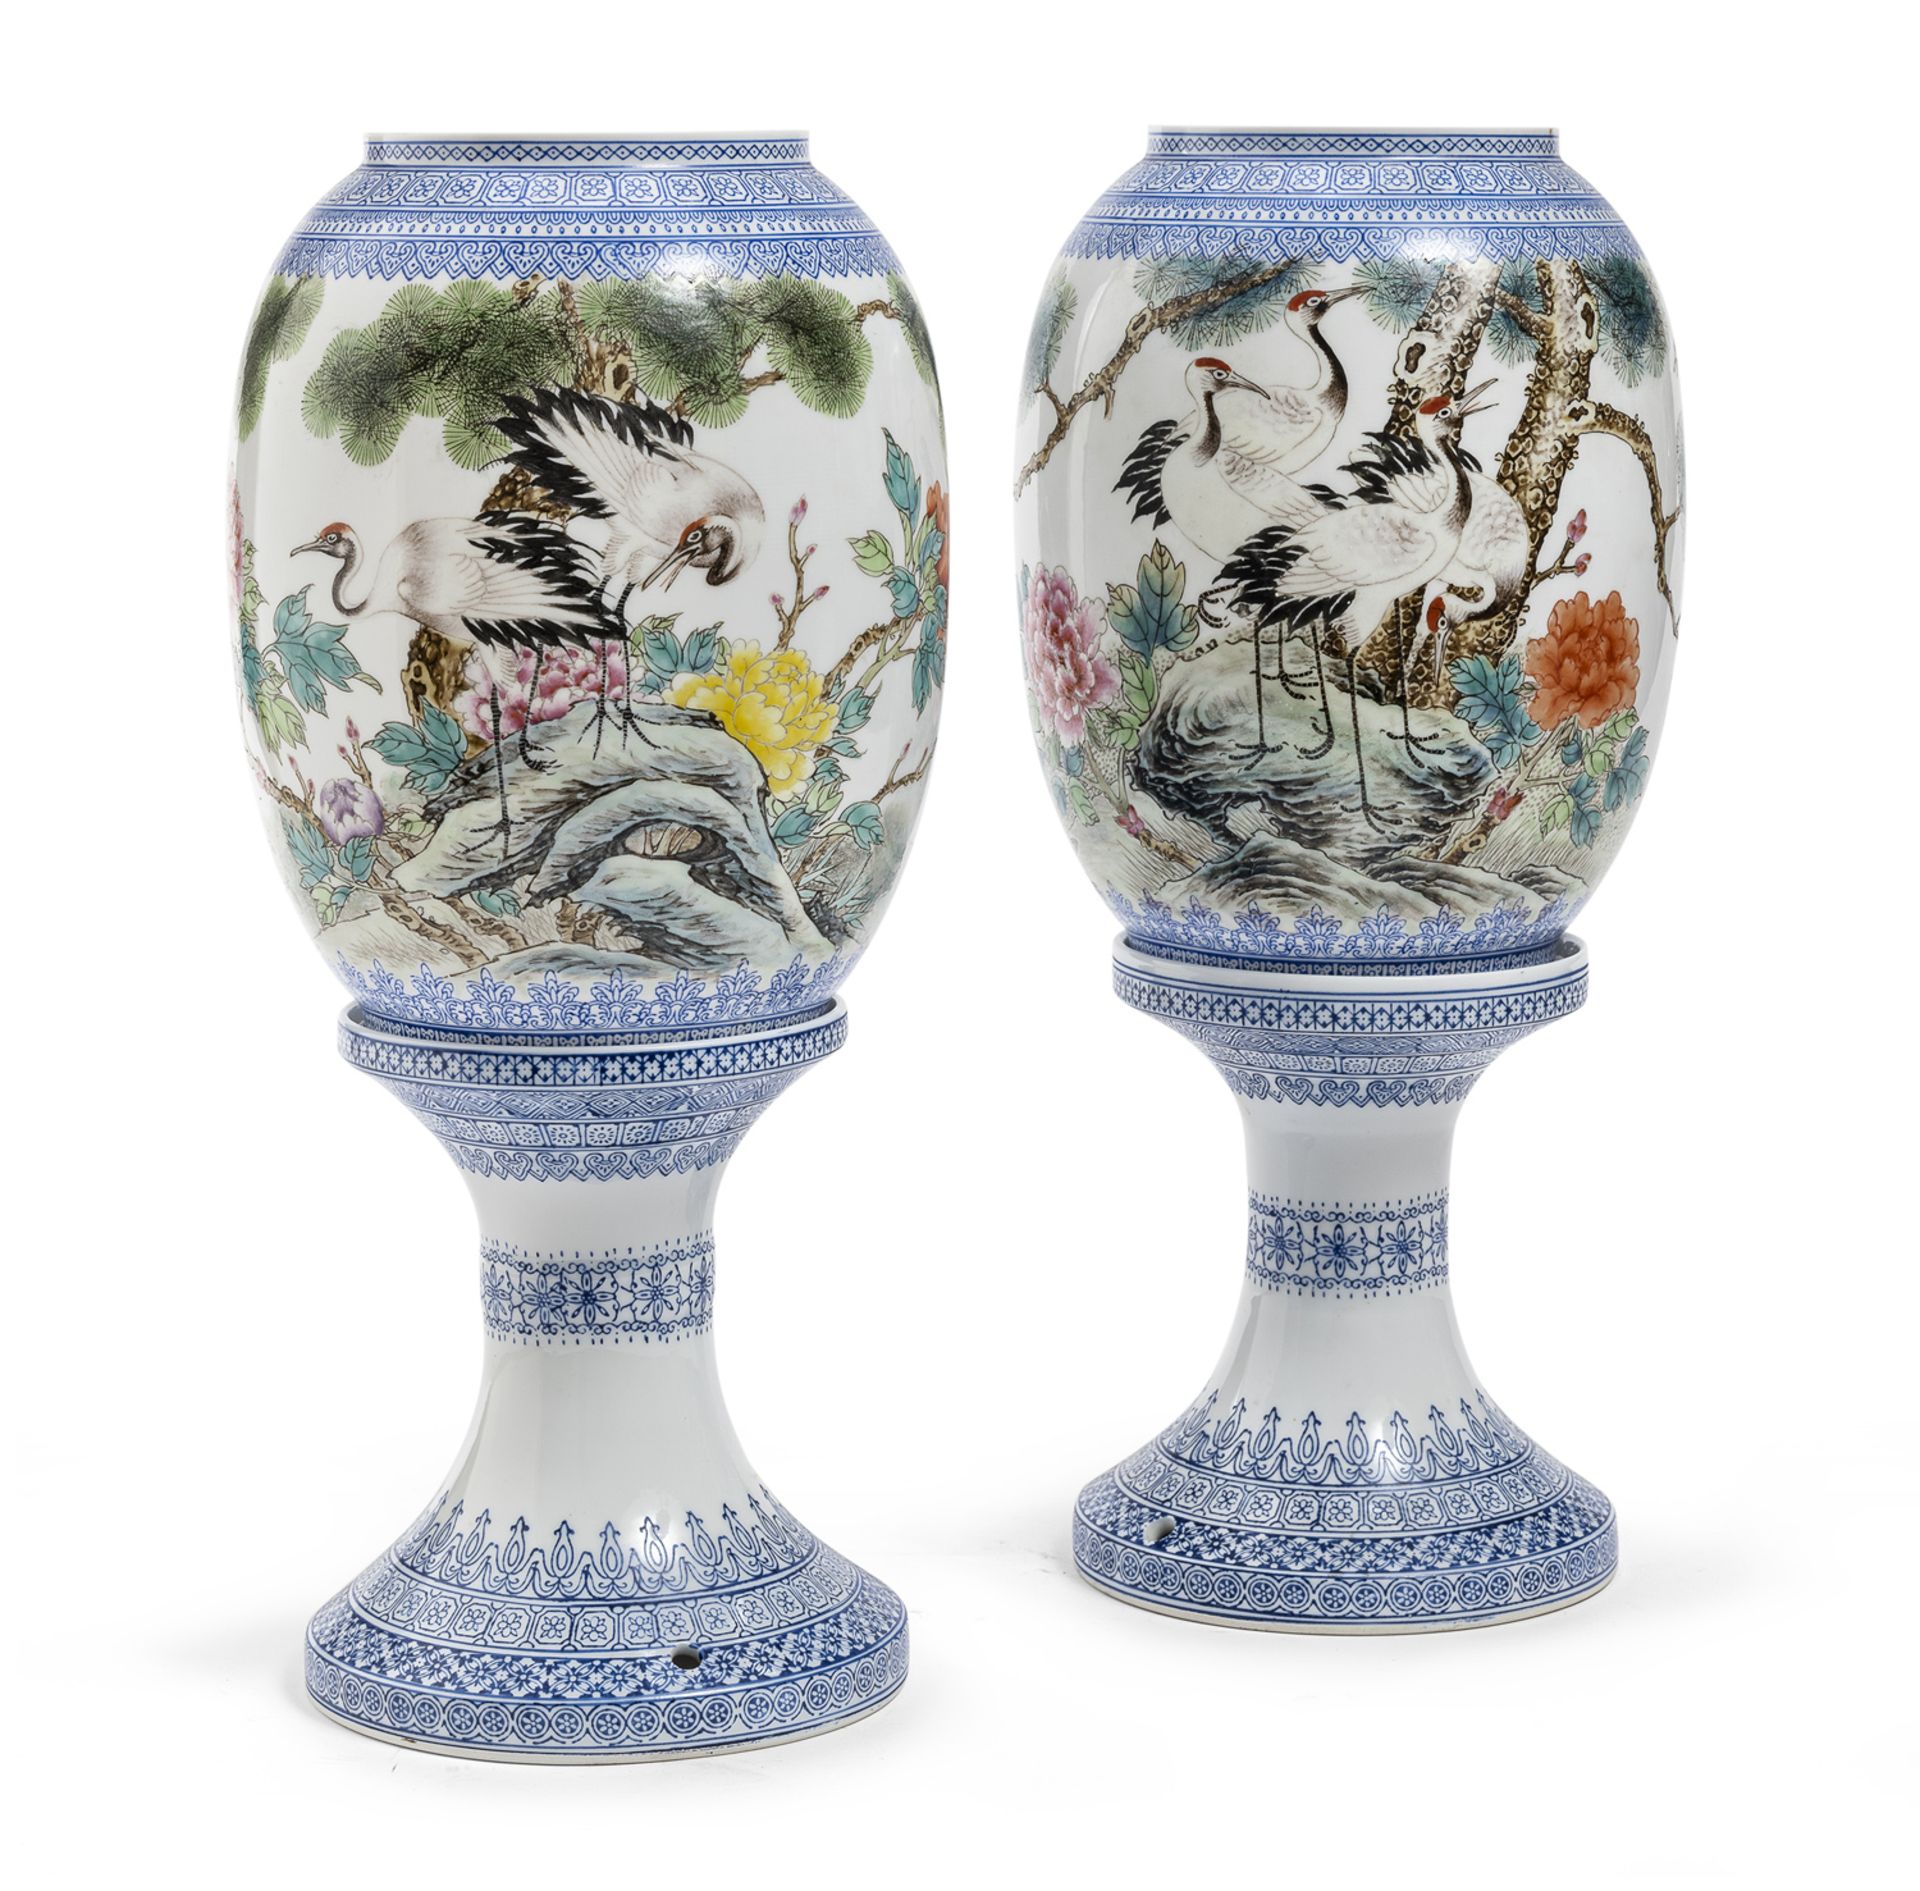 A RARE PAIR OF CHINESE POLYCHROME ENAMELED PORCELAIN LAMPS 20TH CENTURY.